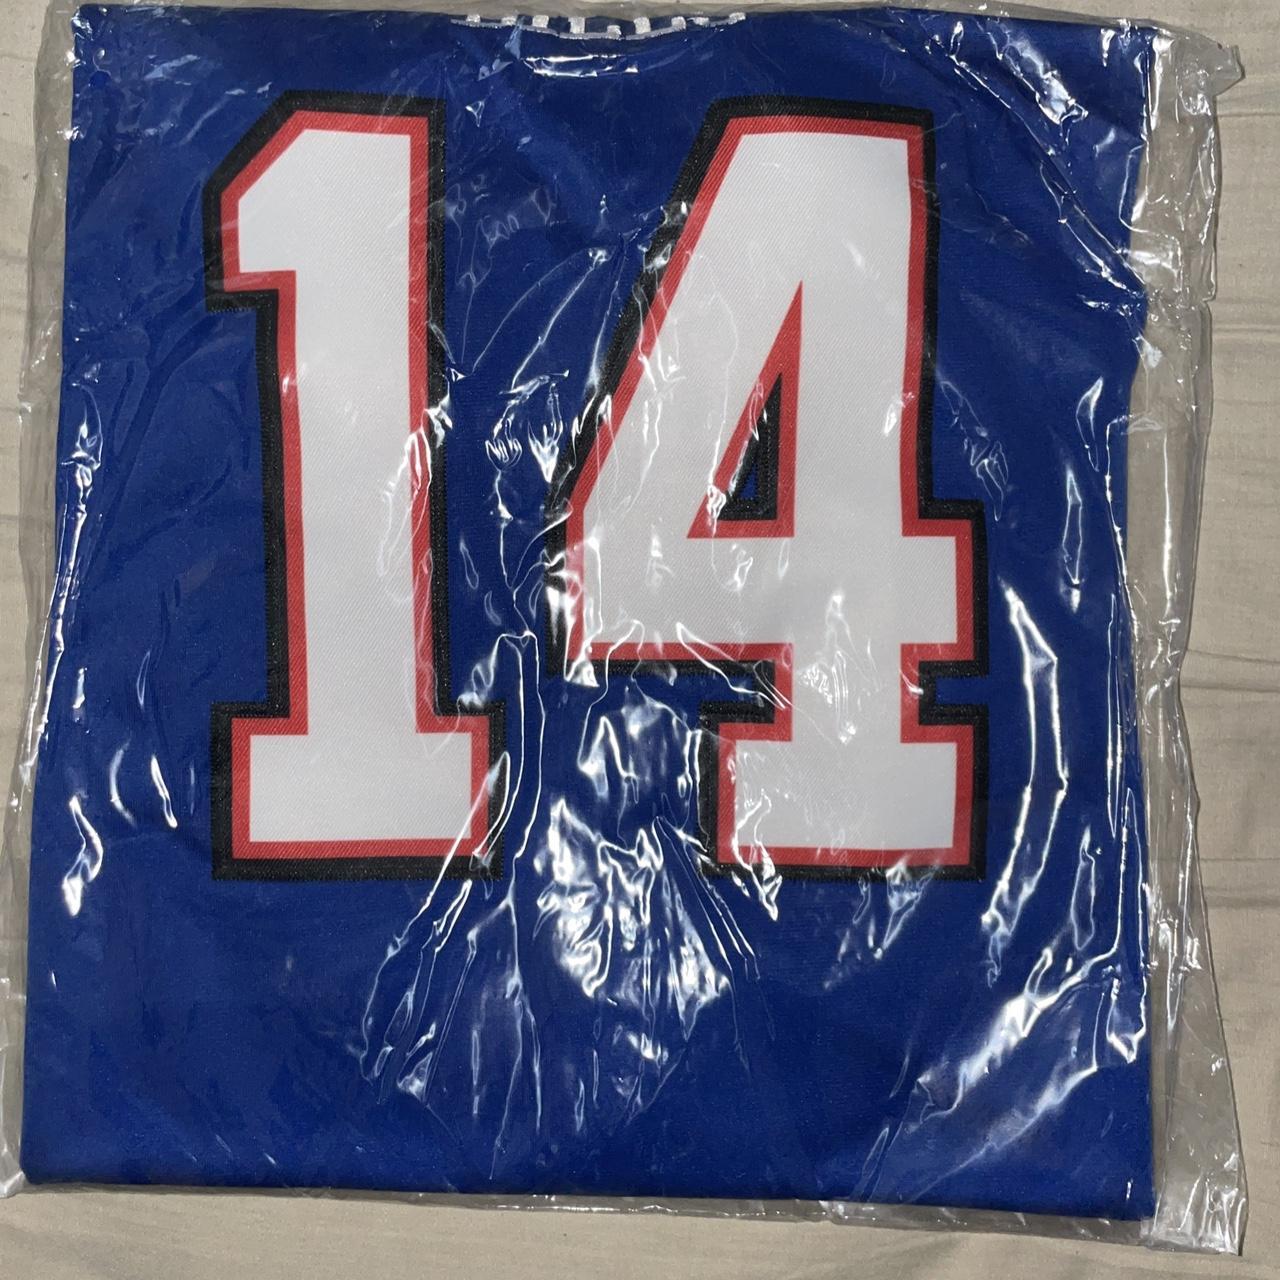 Brand New Buffalo Bills Stefon Diggs Jersey With Tags - Size Men's